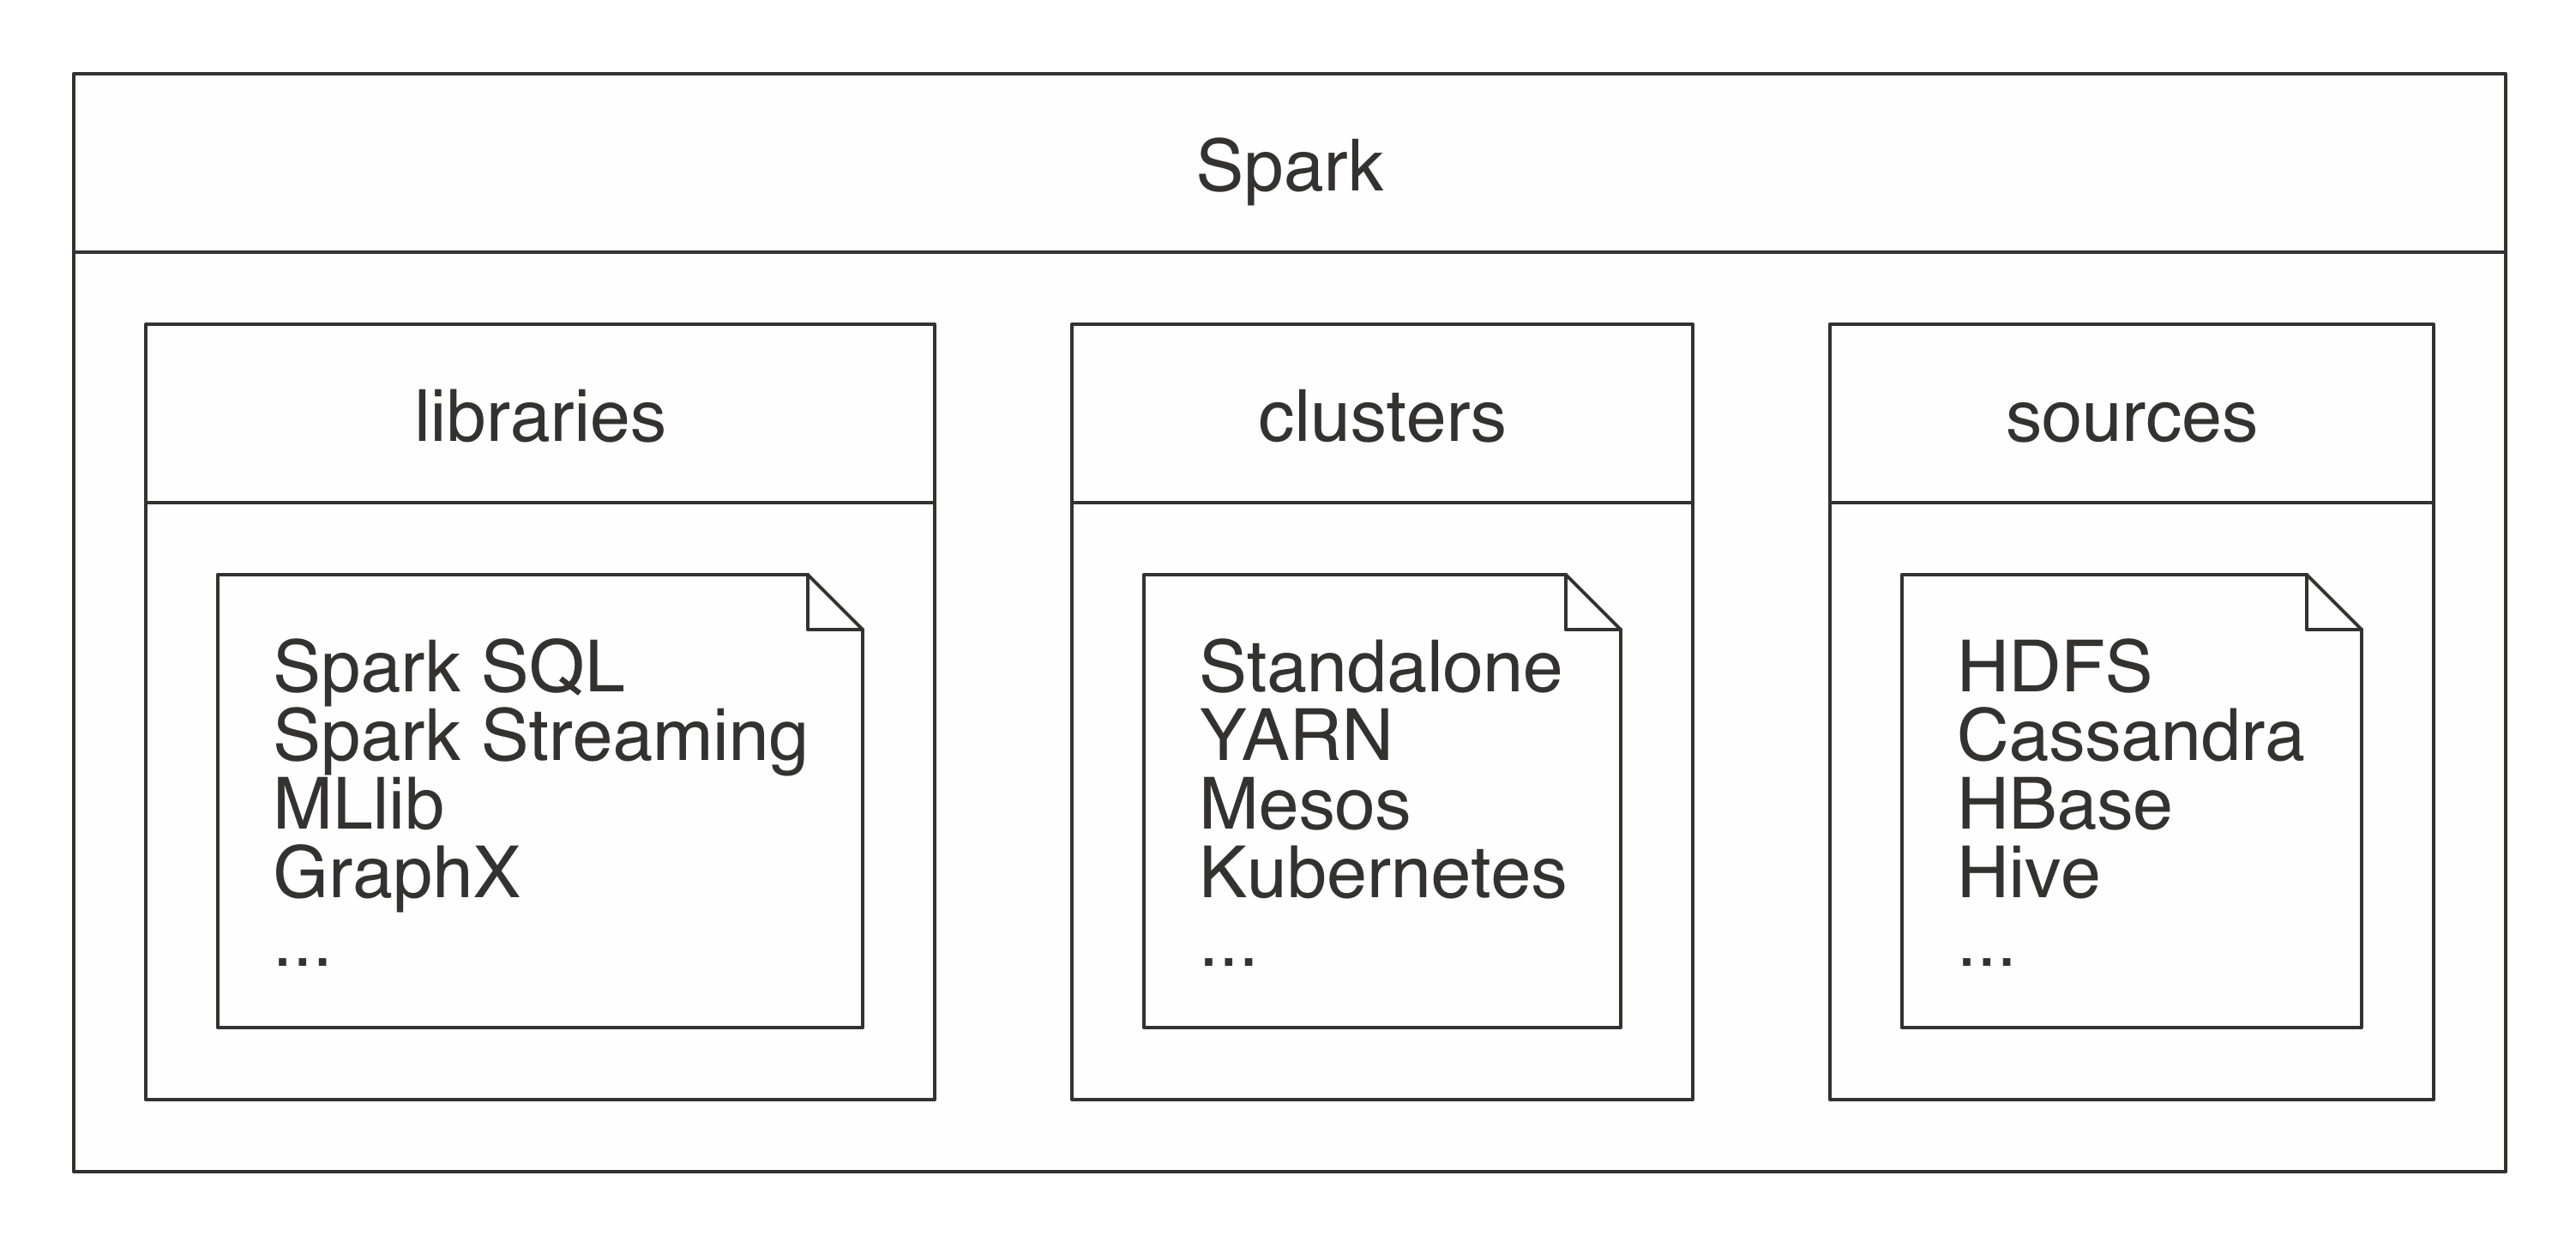 Spark as a unified analytics engine for large-scale data processing